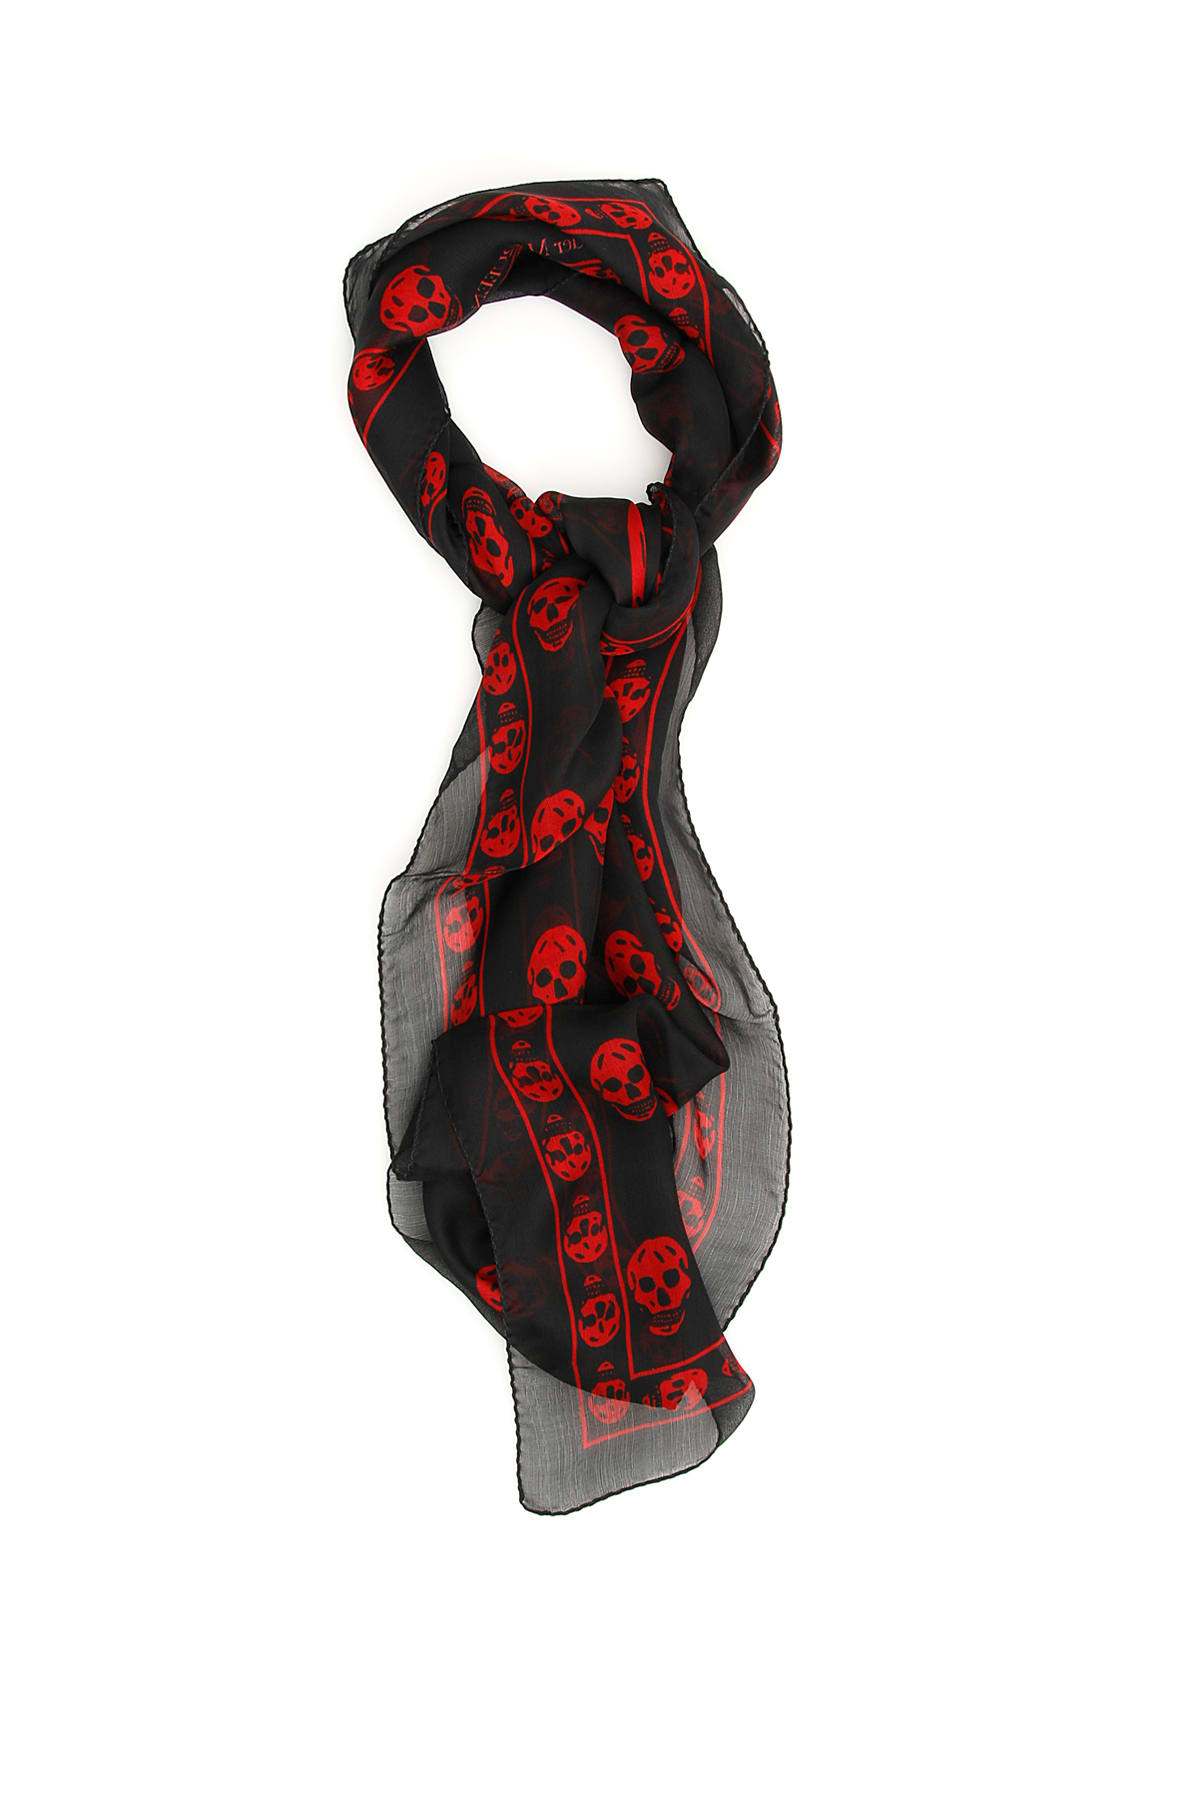 black and red alexander mcqueen